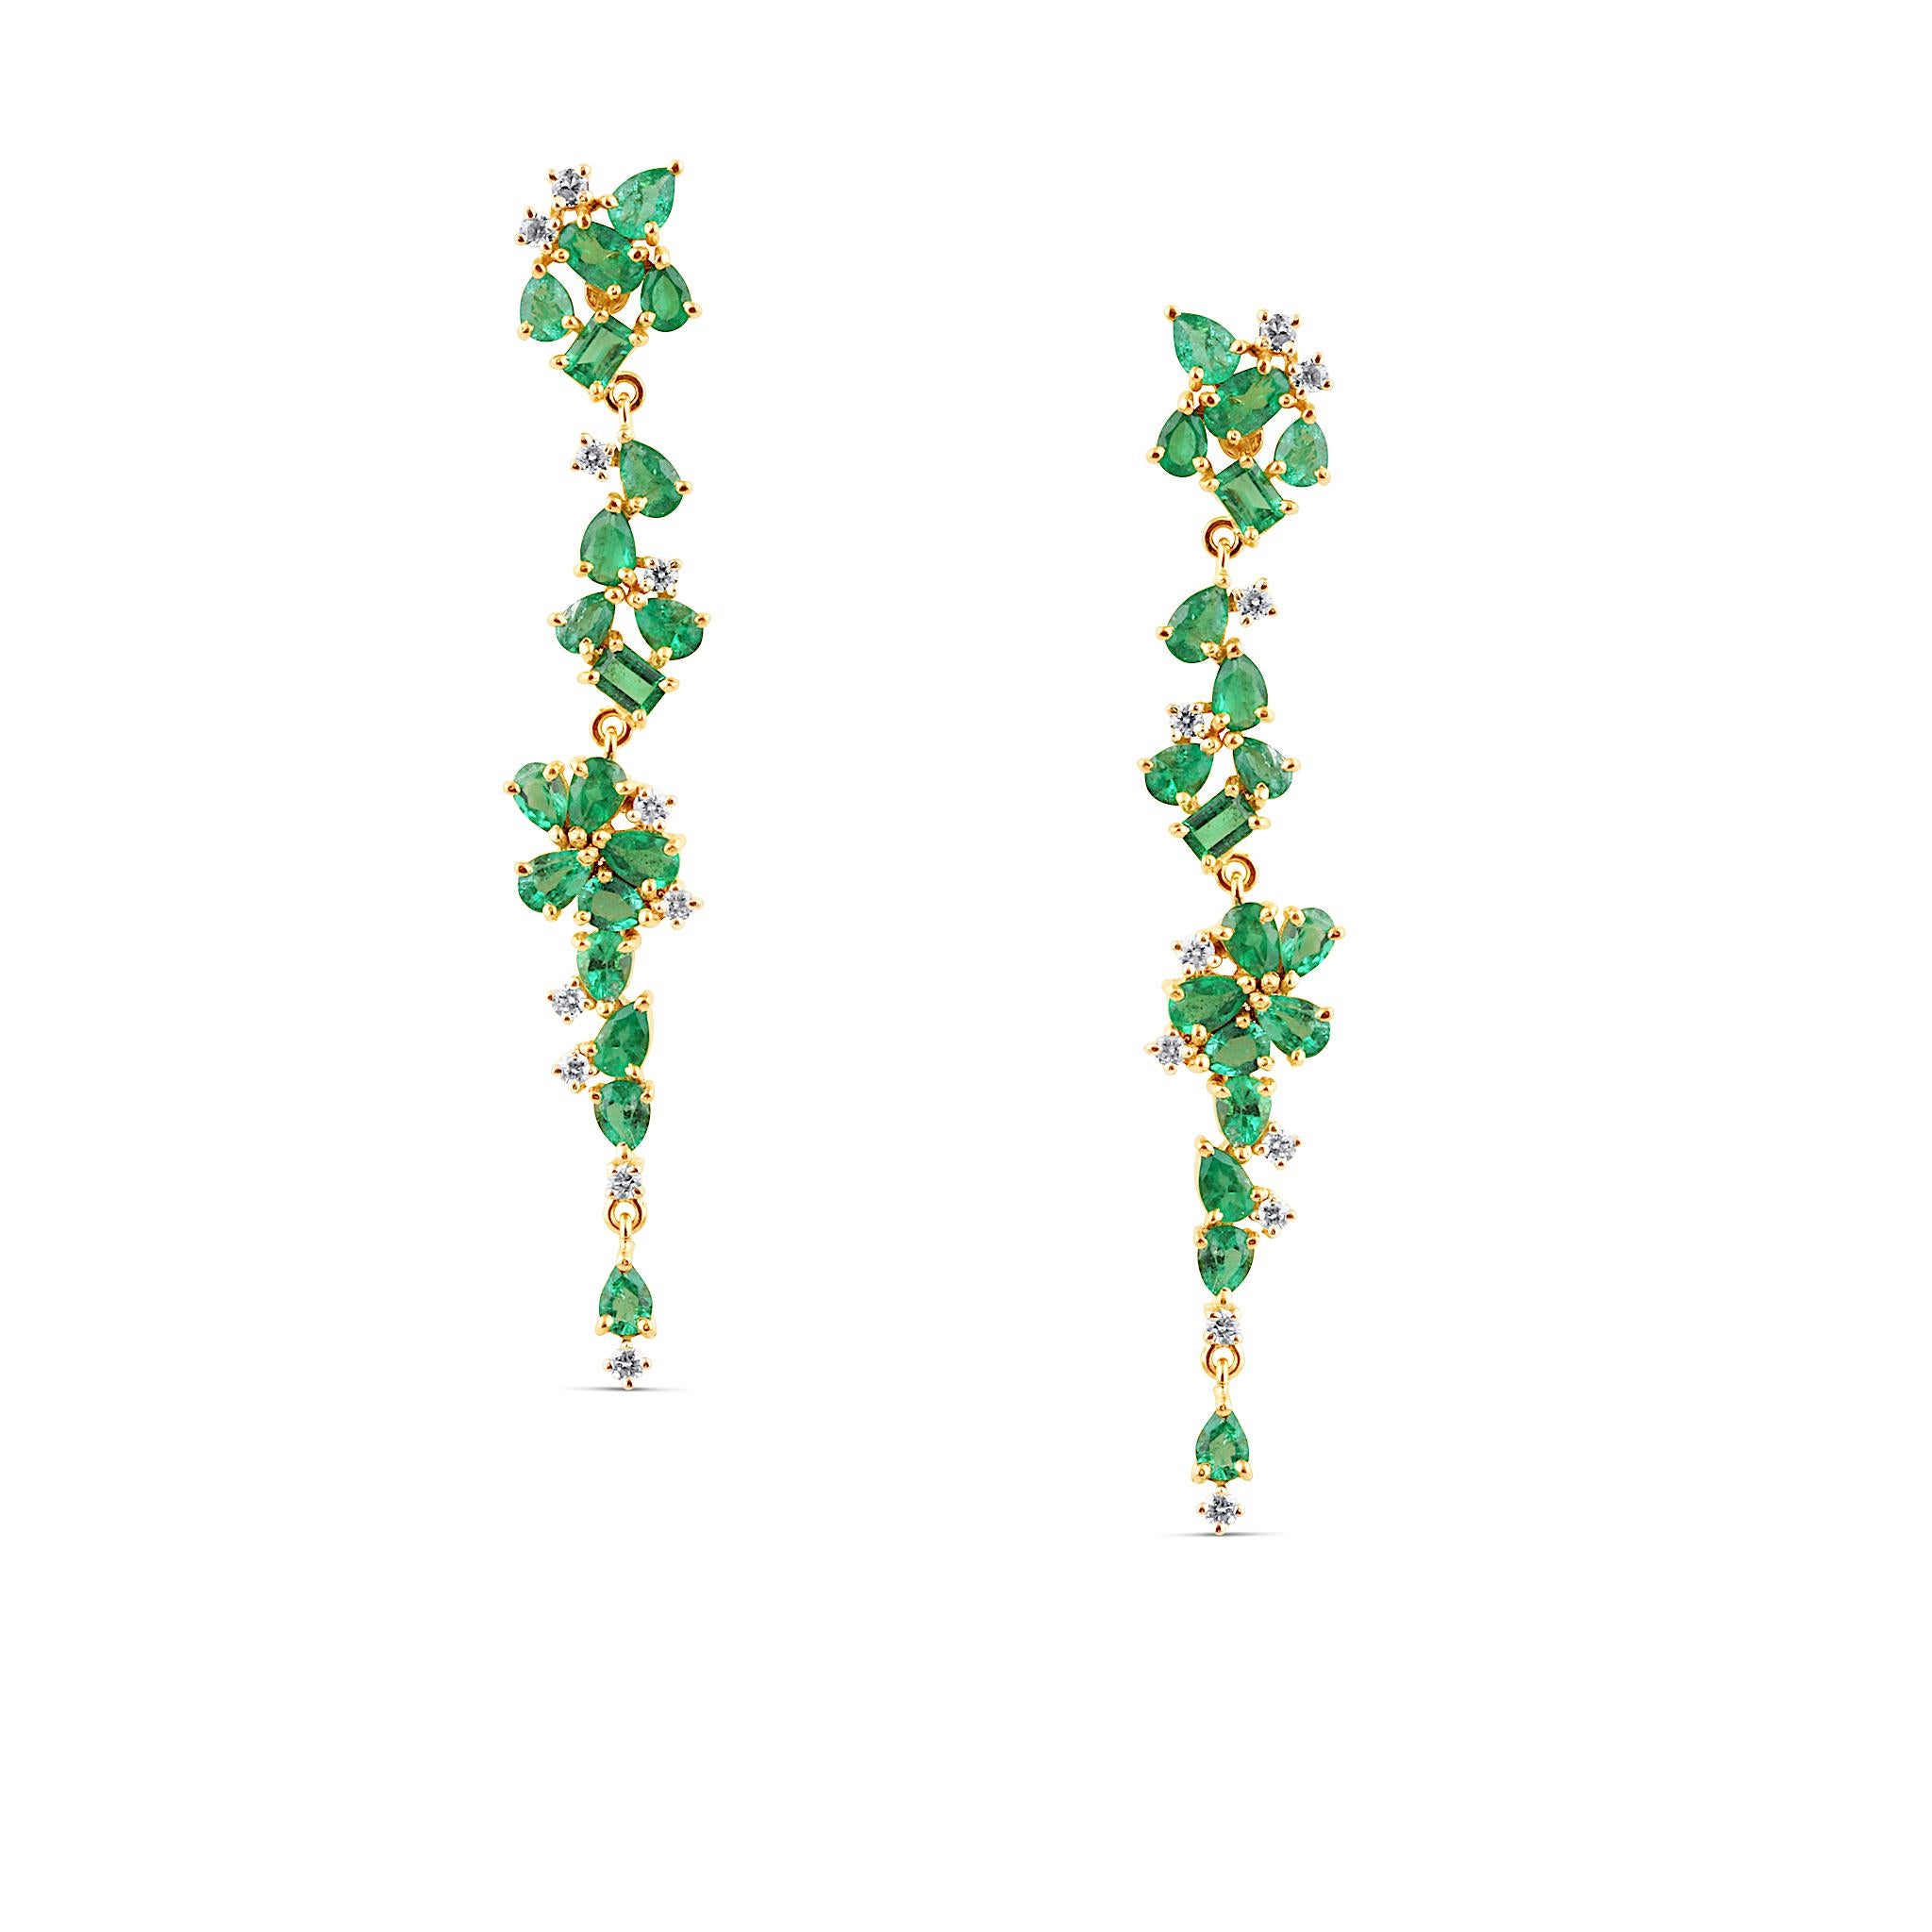 Tresor Beautiful Earring feature 3.85 carats of Emerald and 0.04 carats of Diamond Weight. The Earring is an ode to the luxurious yet classic beauty with sparkly gemstones and feminine hues. Their contemporary and modern design make them perfect and